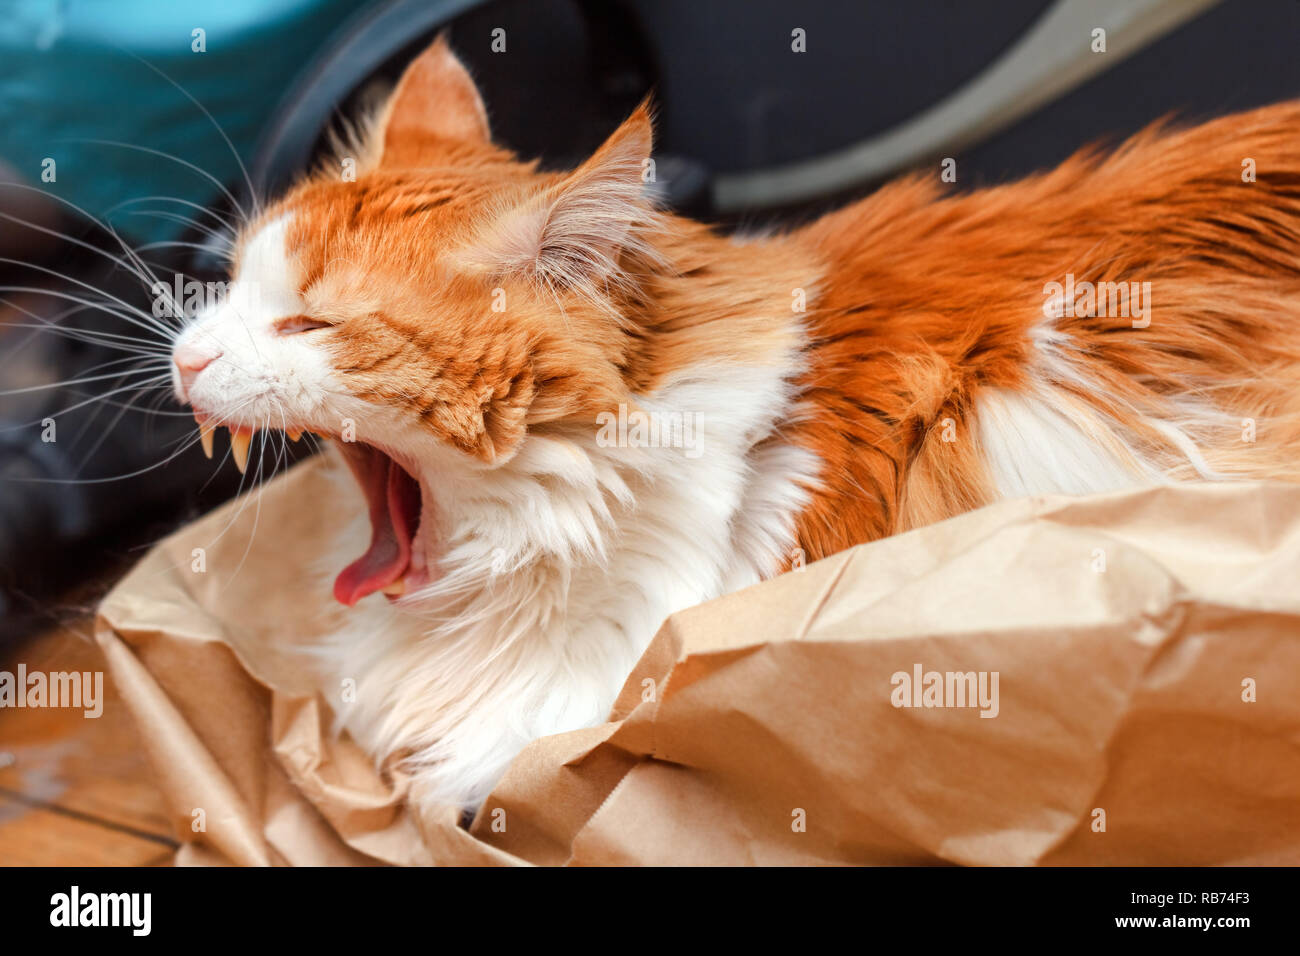 Adult big yawning red cat in paper Stock Photo